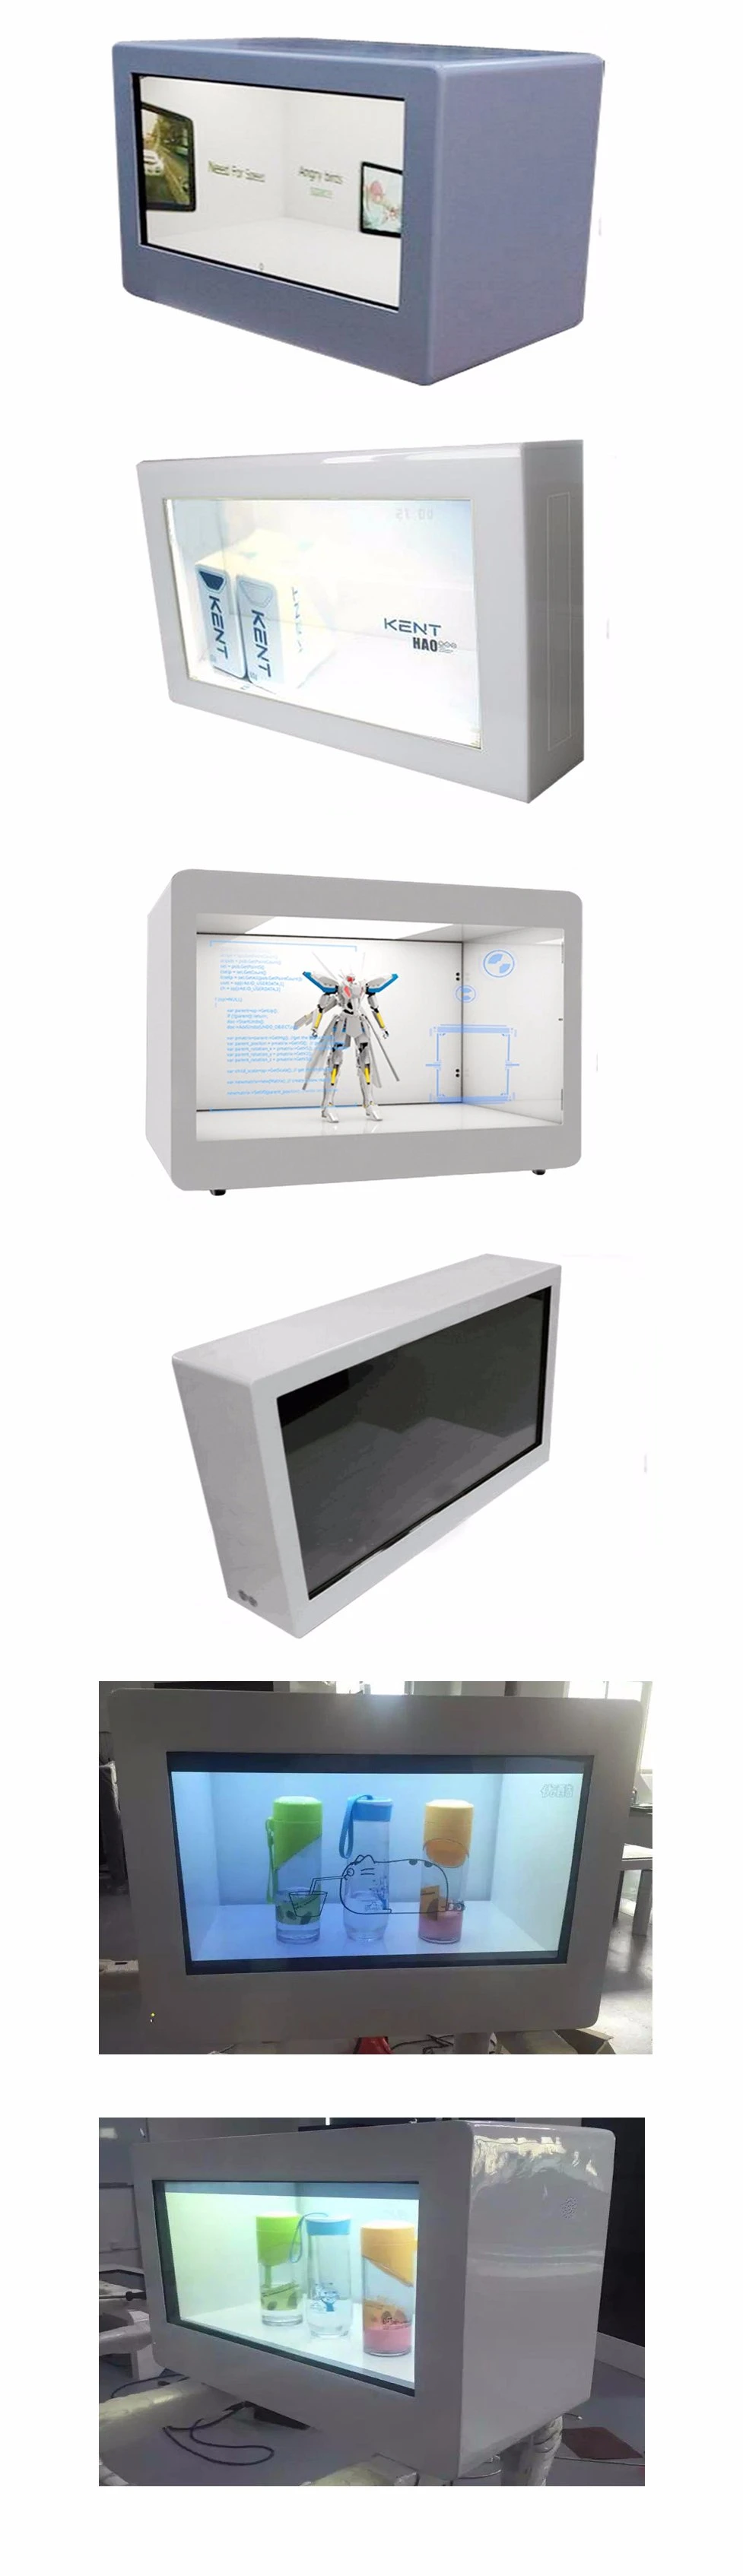 27 Inch Transparent Showcase Box LCD Advertising Display Network WiFi Video Ad Player Touch Screen Kiosk